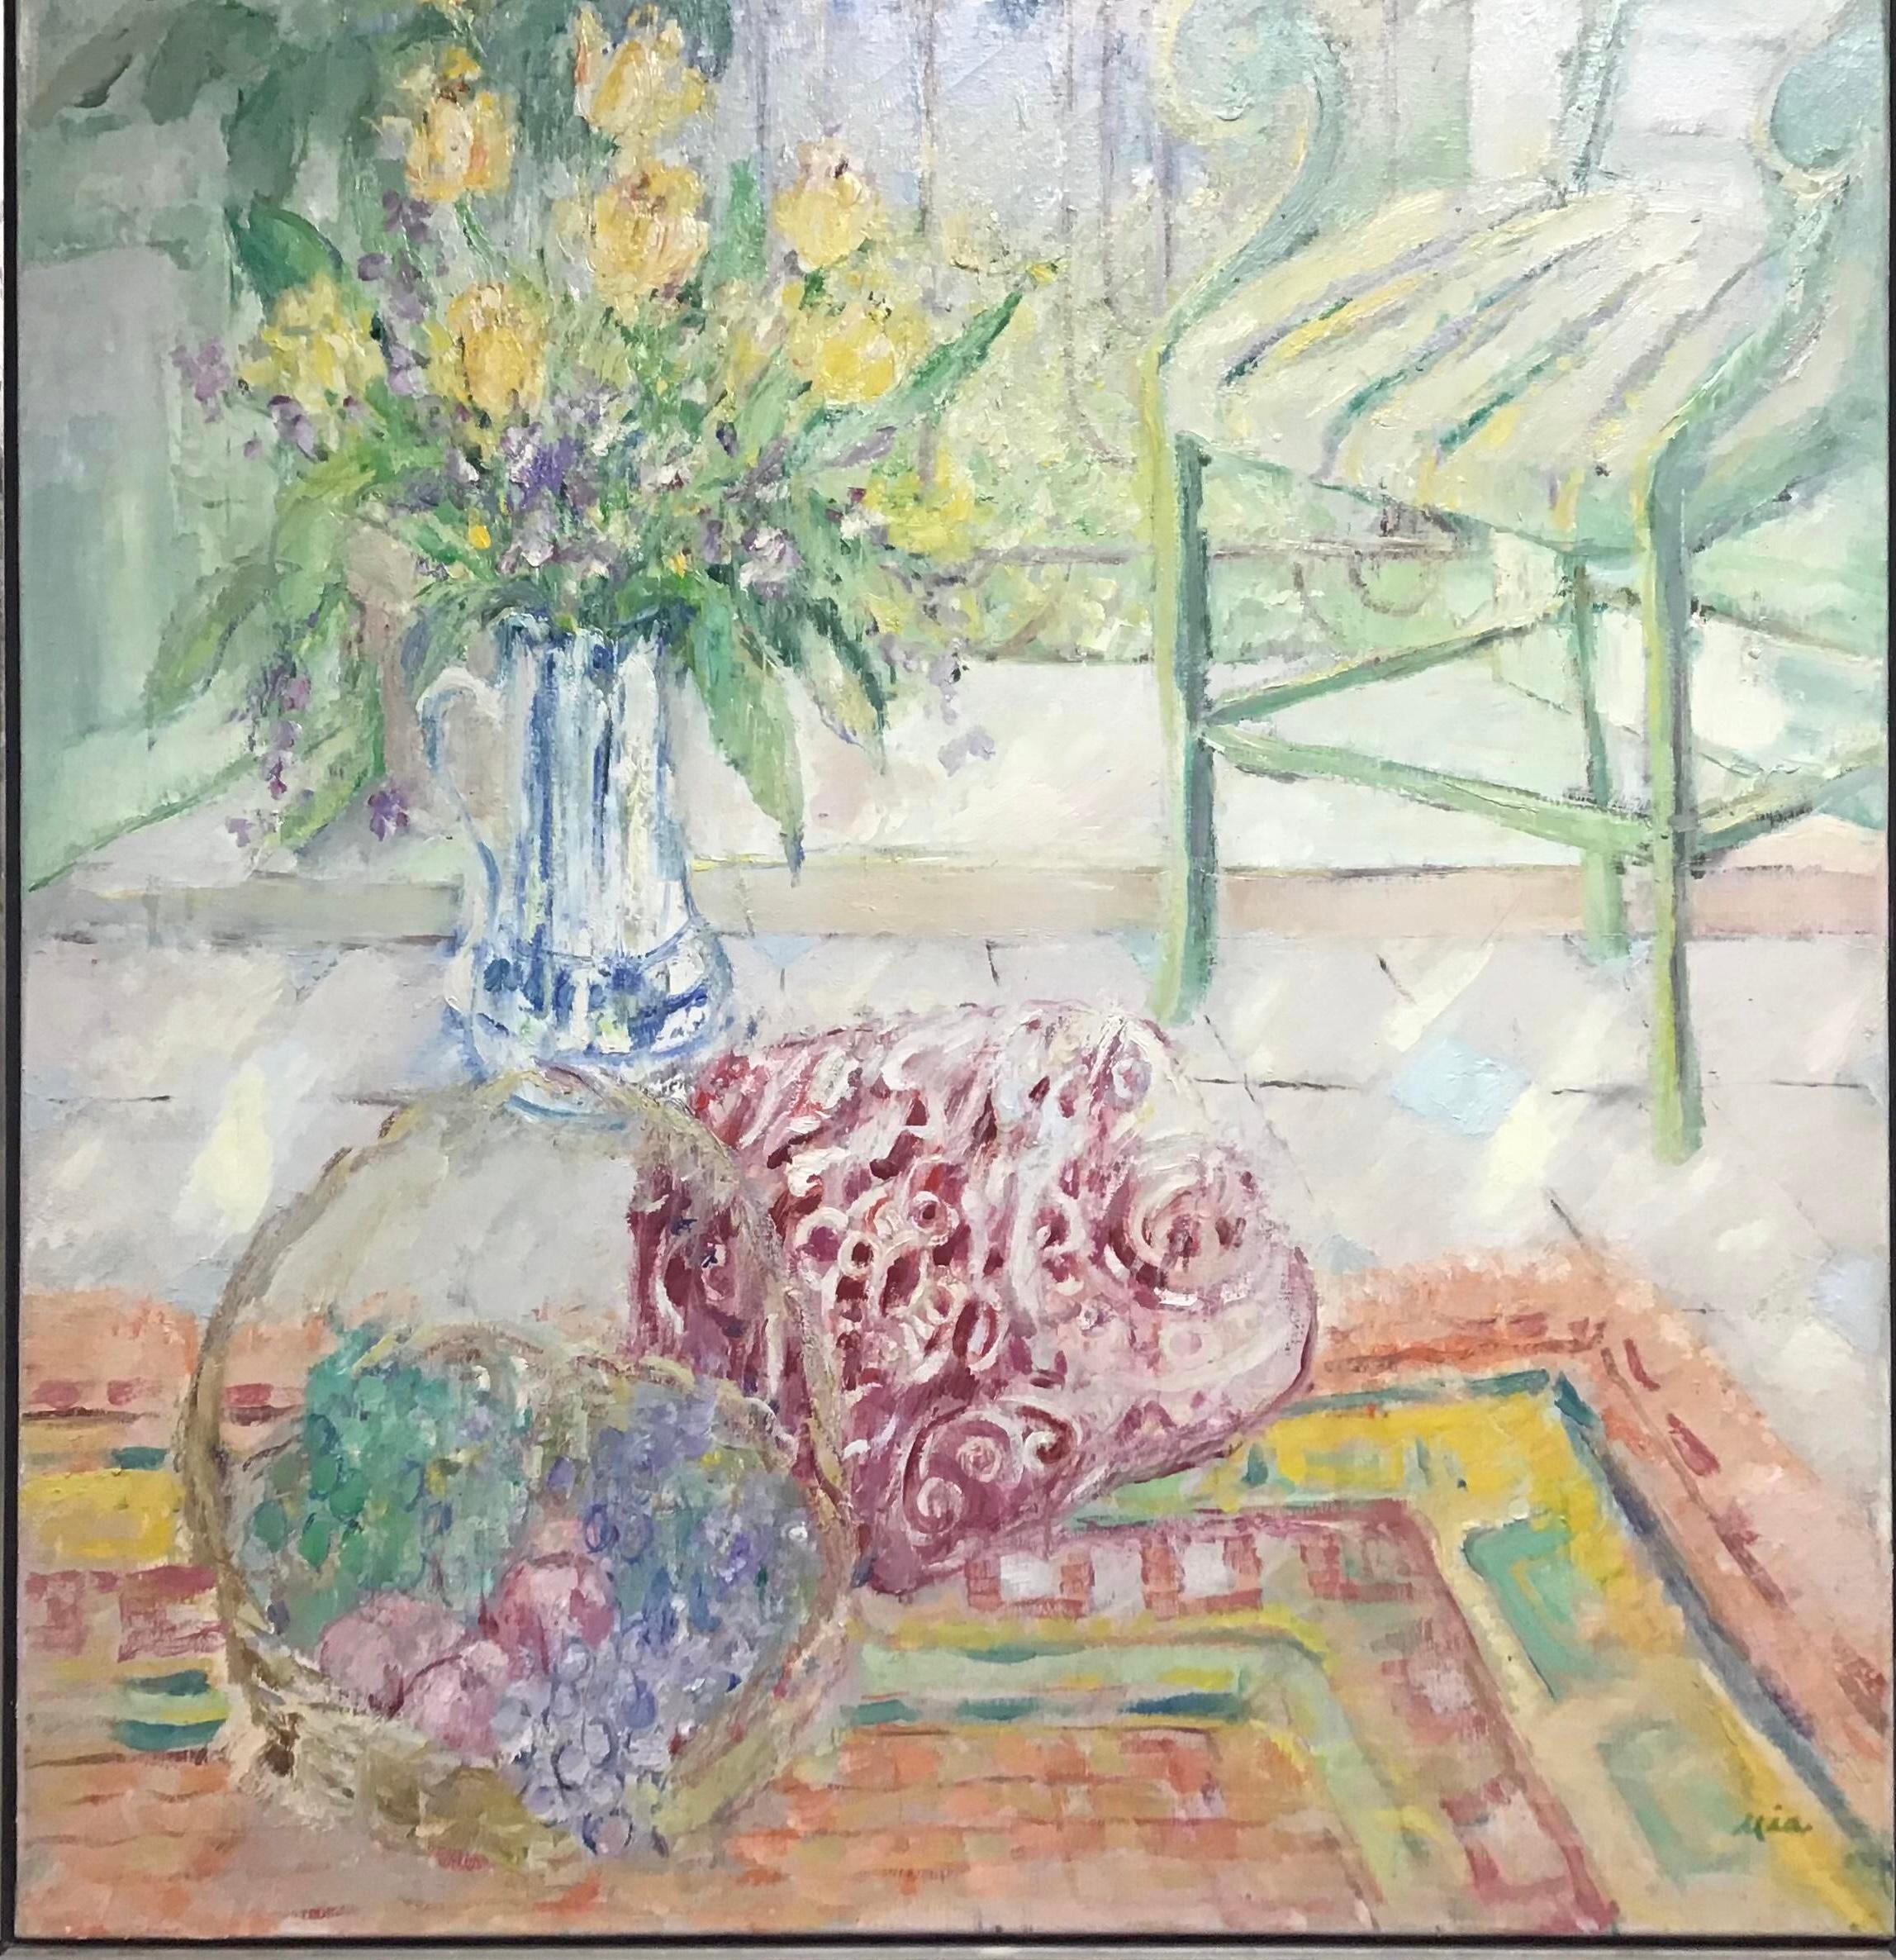 Lovely large original oil on canvas still life painting of vase of flowers sitting on a table in front of a window next to a chair. Impressionist style with heavy impasto paint in colorful style. Housed in a thin modern silver gilt frame. Signed Mia